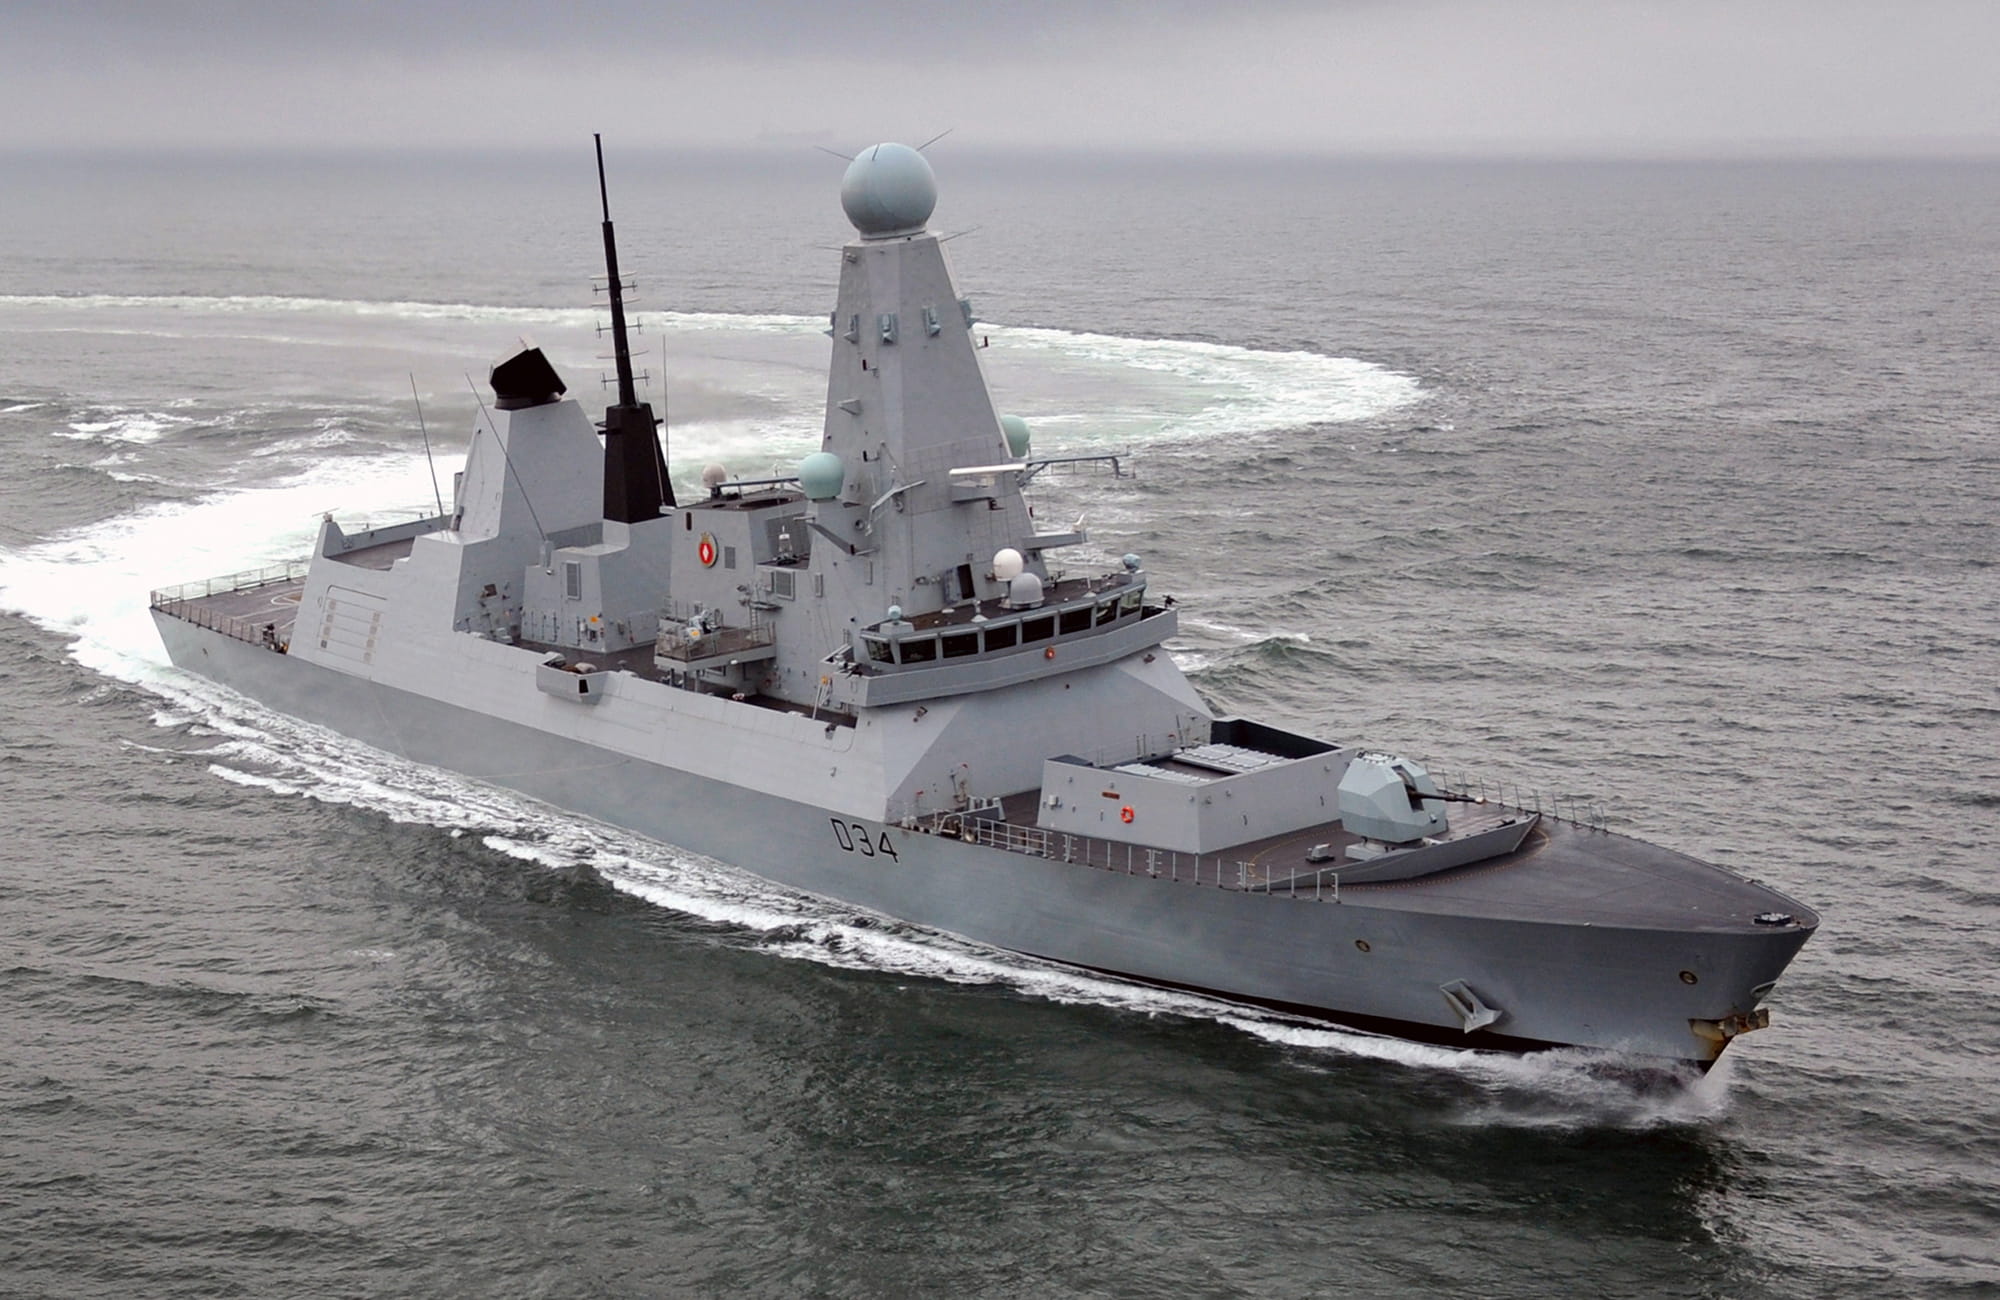 Royal Navy Daring Class destroyer ship carries out manoeuvres at sea